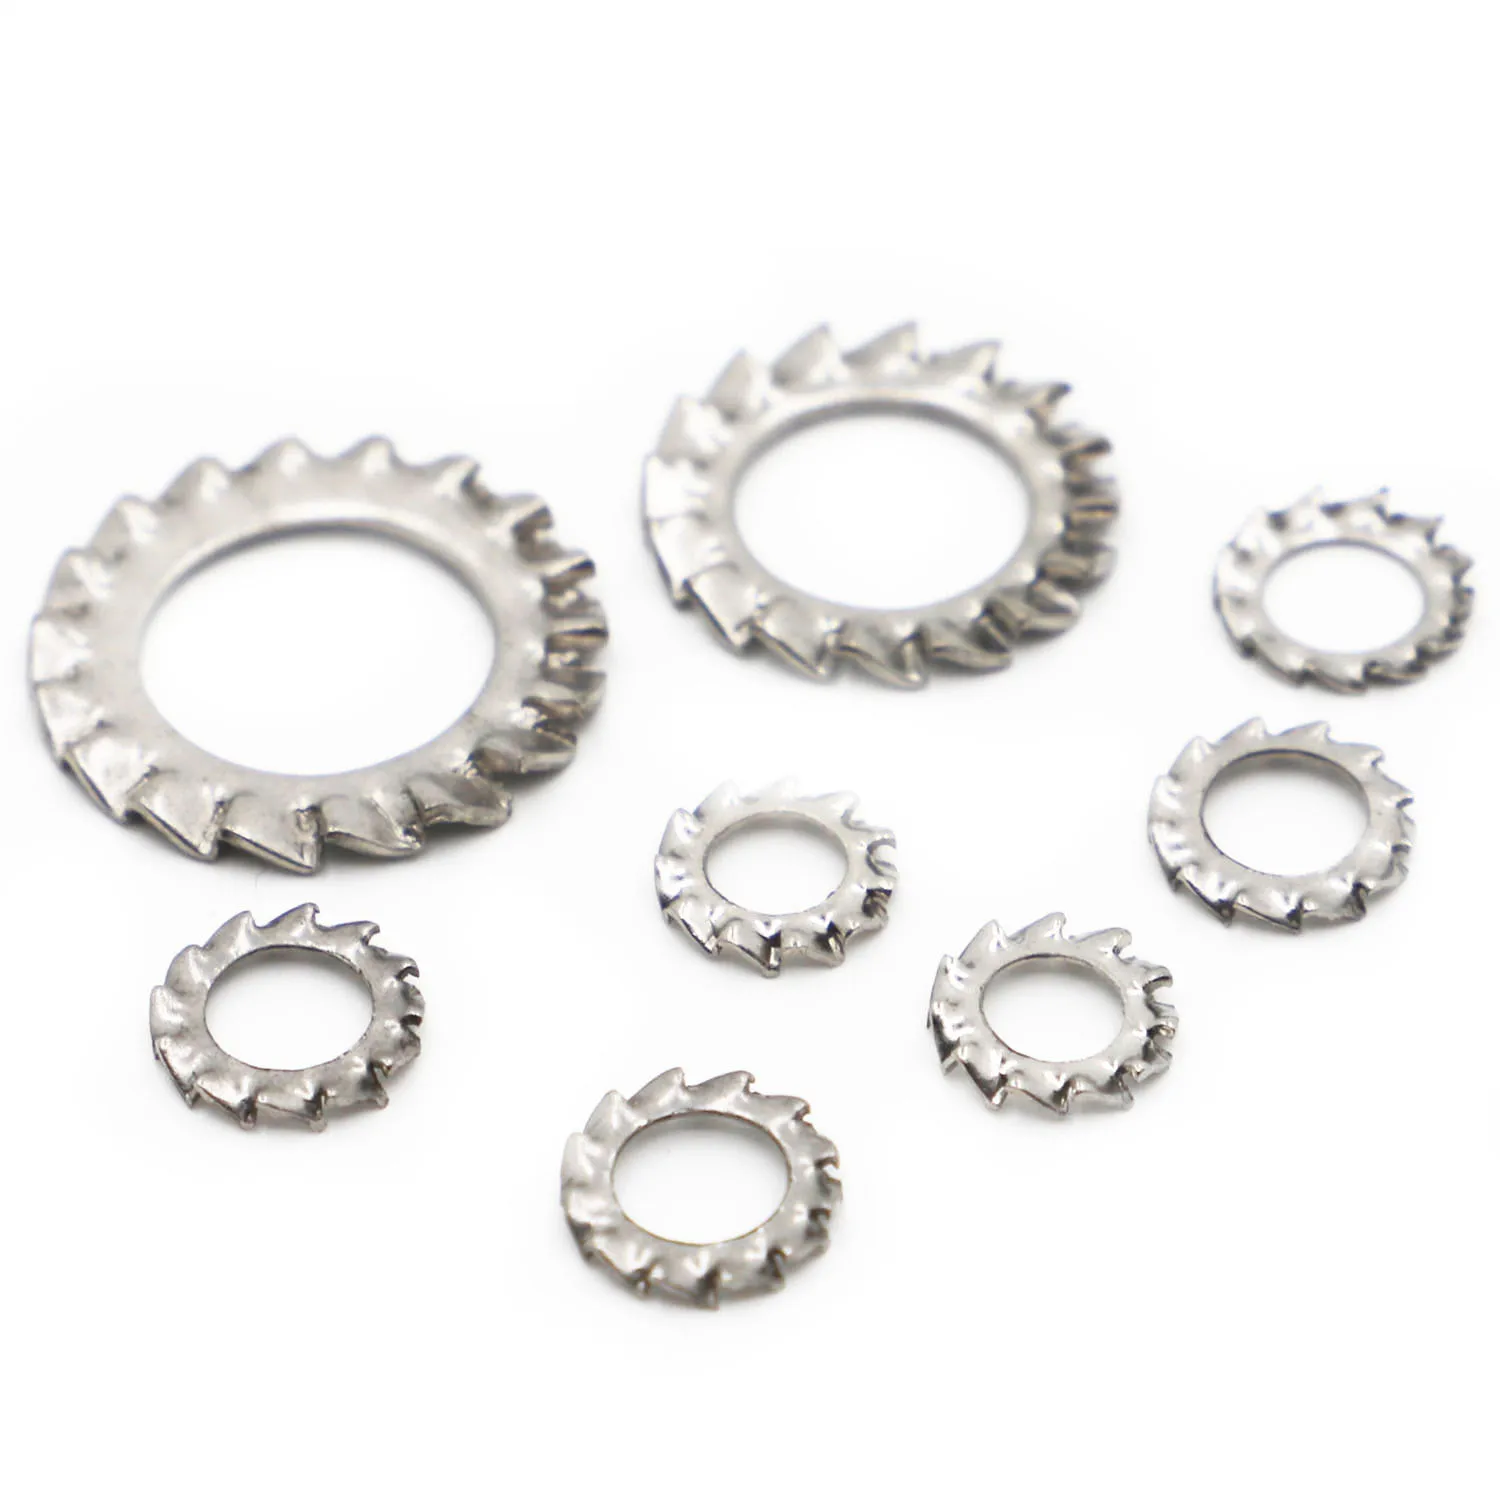 

M2.5 M3 M4 M5 M6 M8 M10 M12 M14 M16 M18 M20 304 Stainless Steel External Toothed Serrated Lock Washer Gasket GB862.2 DIN6798A